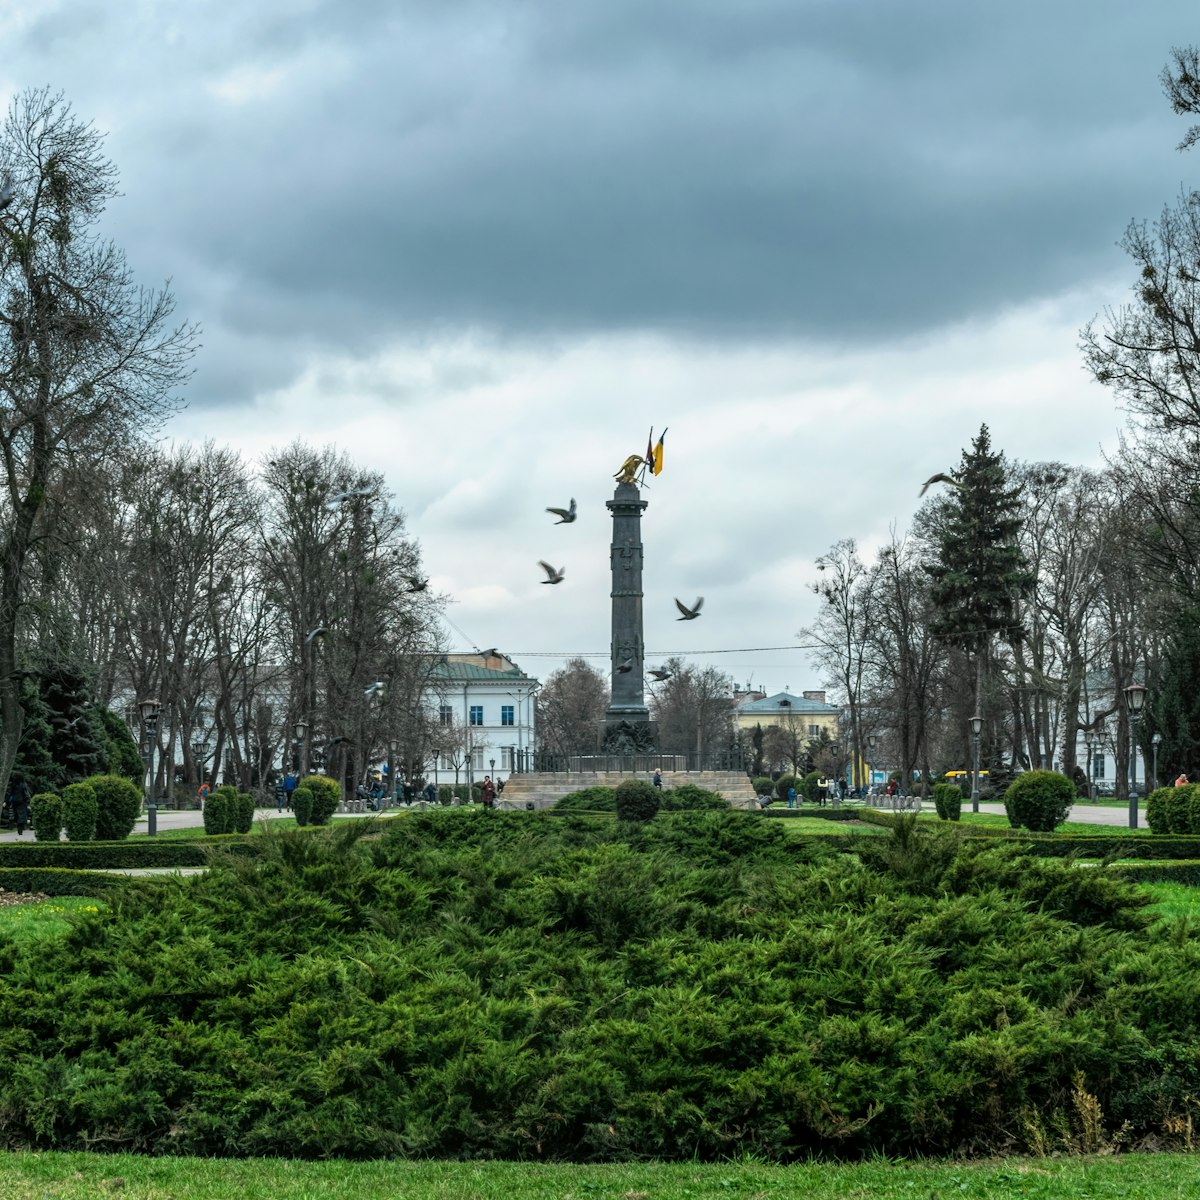 Memorial column with the national flags of Ukraine and green flower beds of the city park, Korpusny Park in Poltava, Ukraine. 